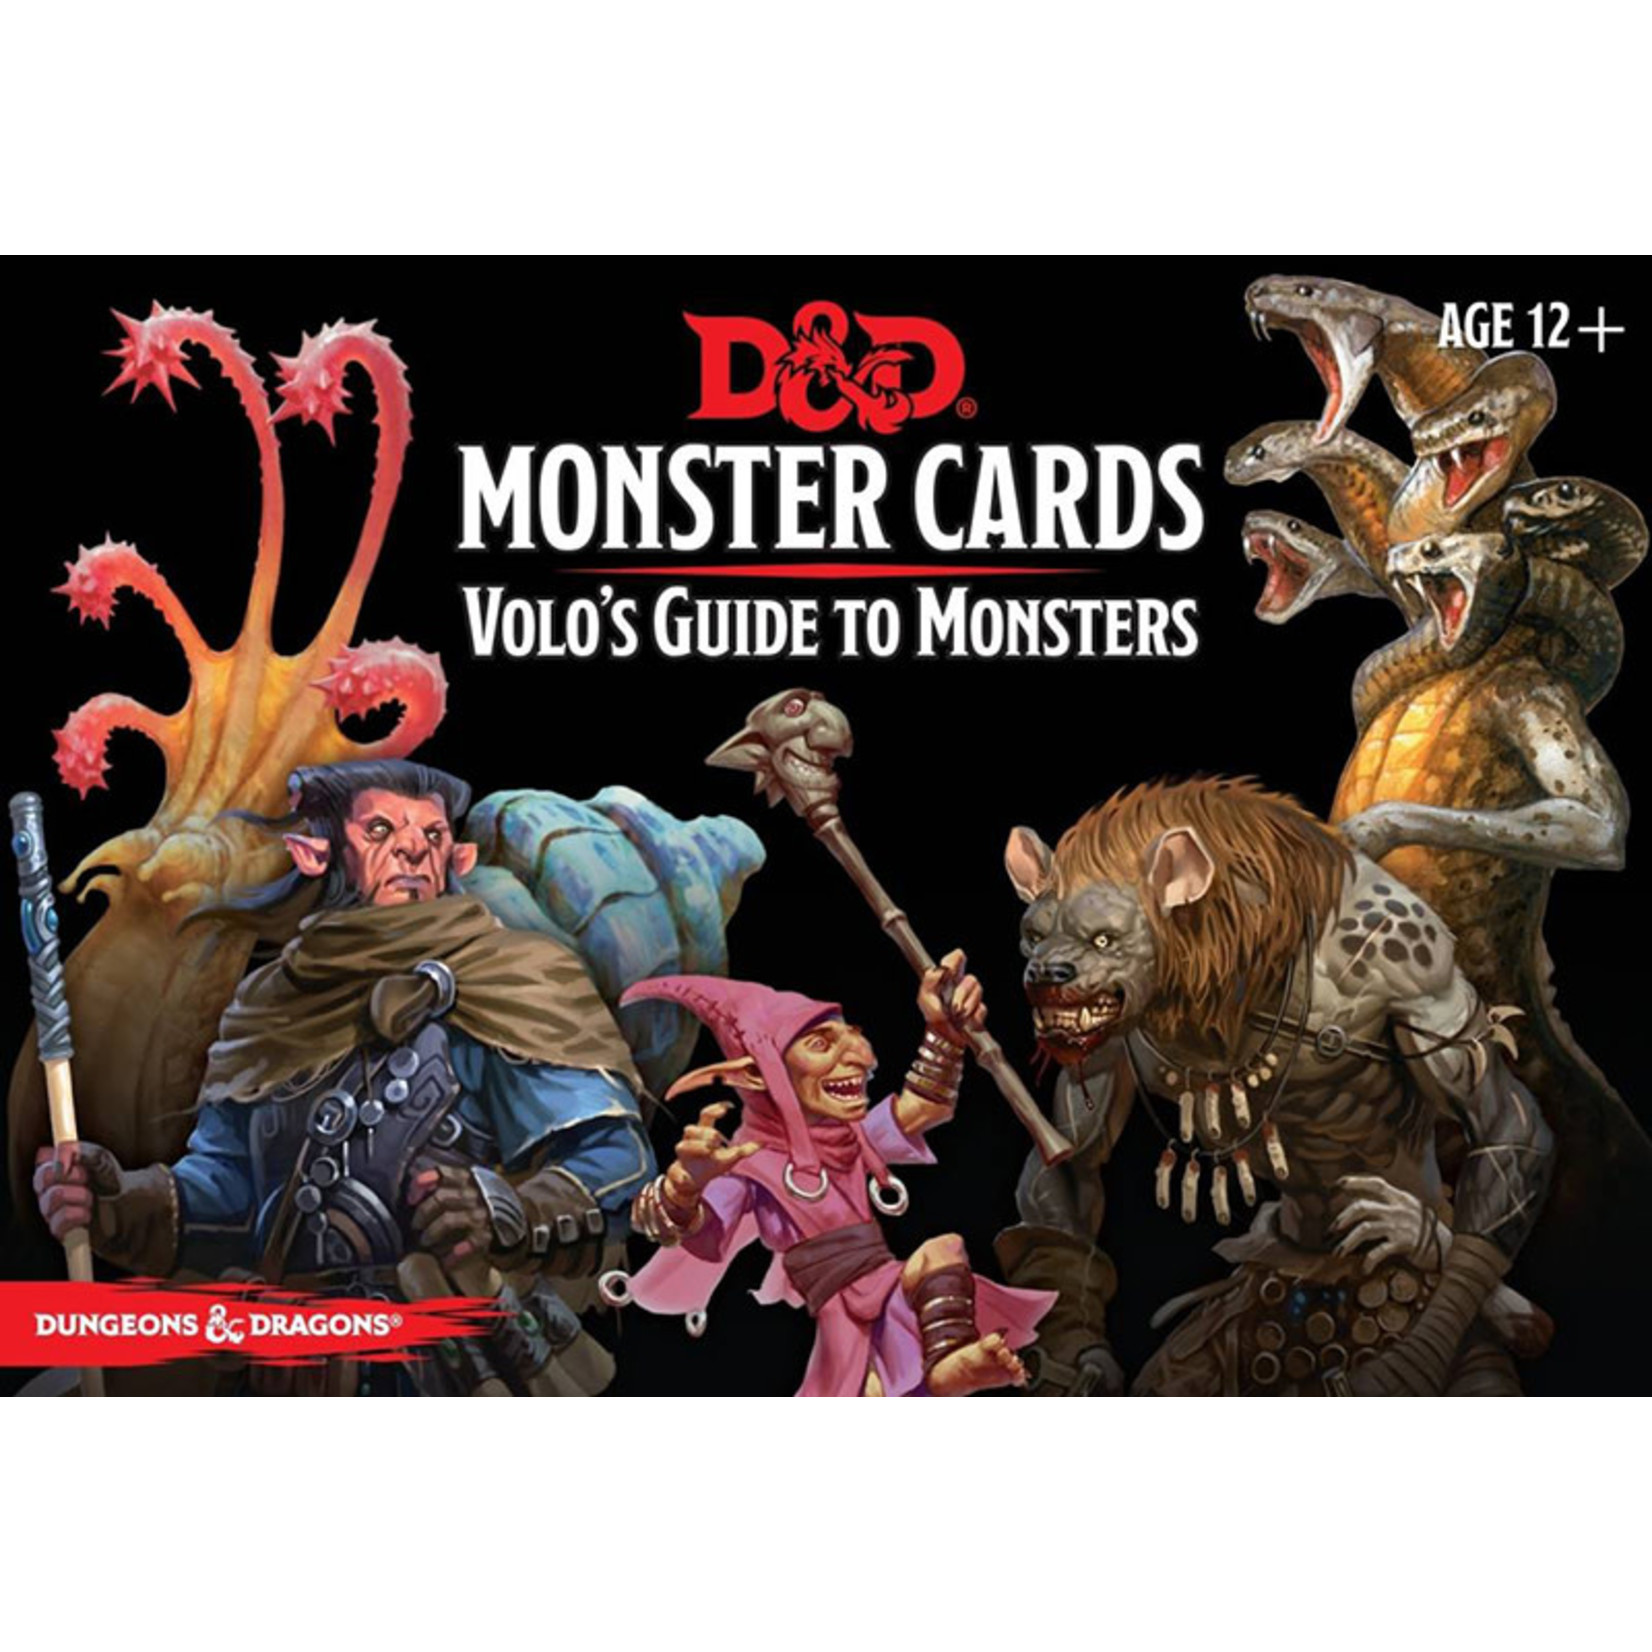 Volo's Guide to Monsters, the cards